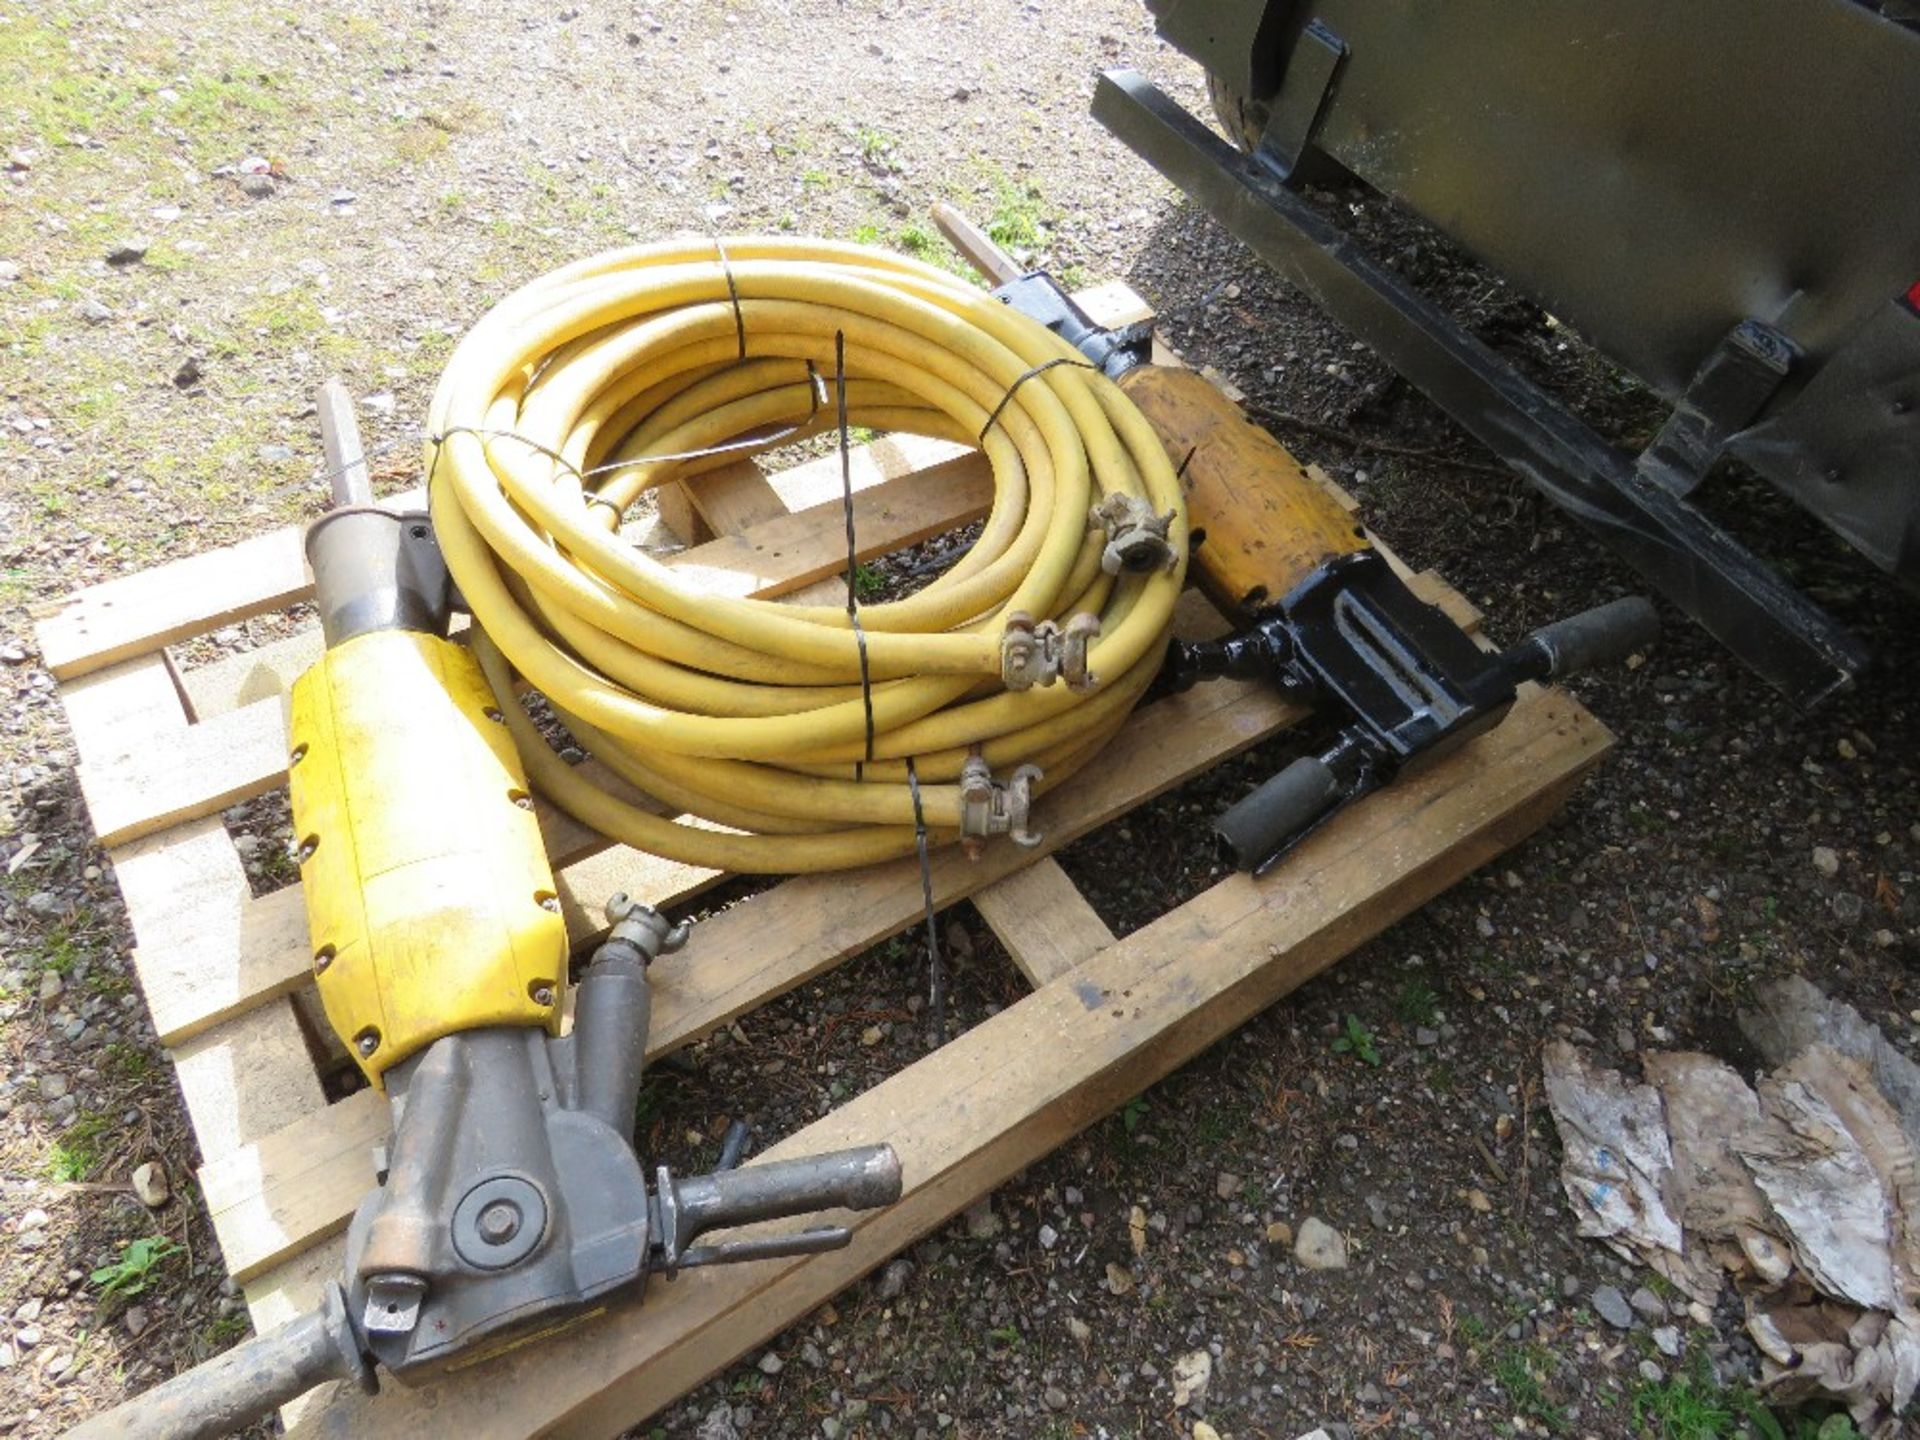 KAESER M50 COMPRESSOR 180CFM OUTPUT WITH 2 X HOSES AND 2 X GUNS. OWNER RETIRING. WHEN TESTED WAS SEE - Image 14 of 16